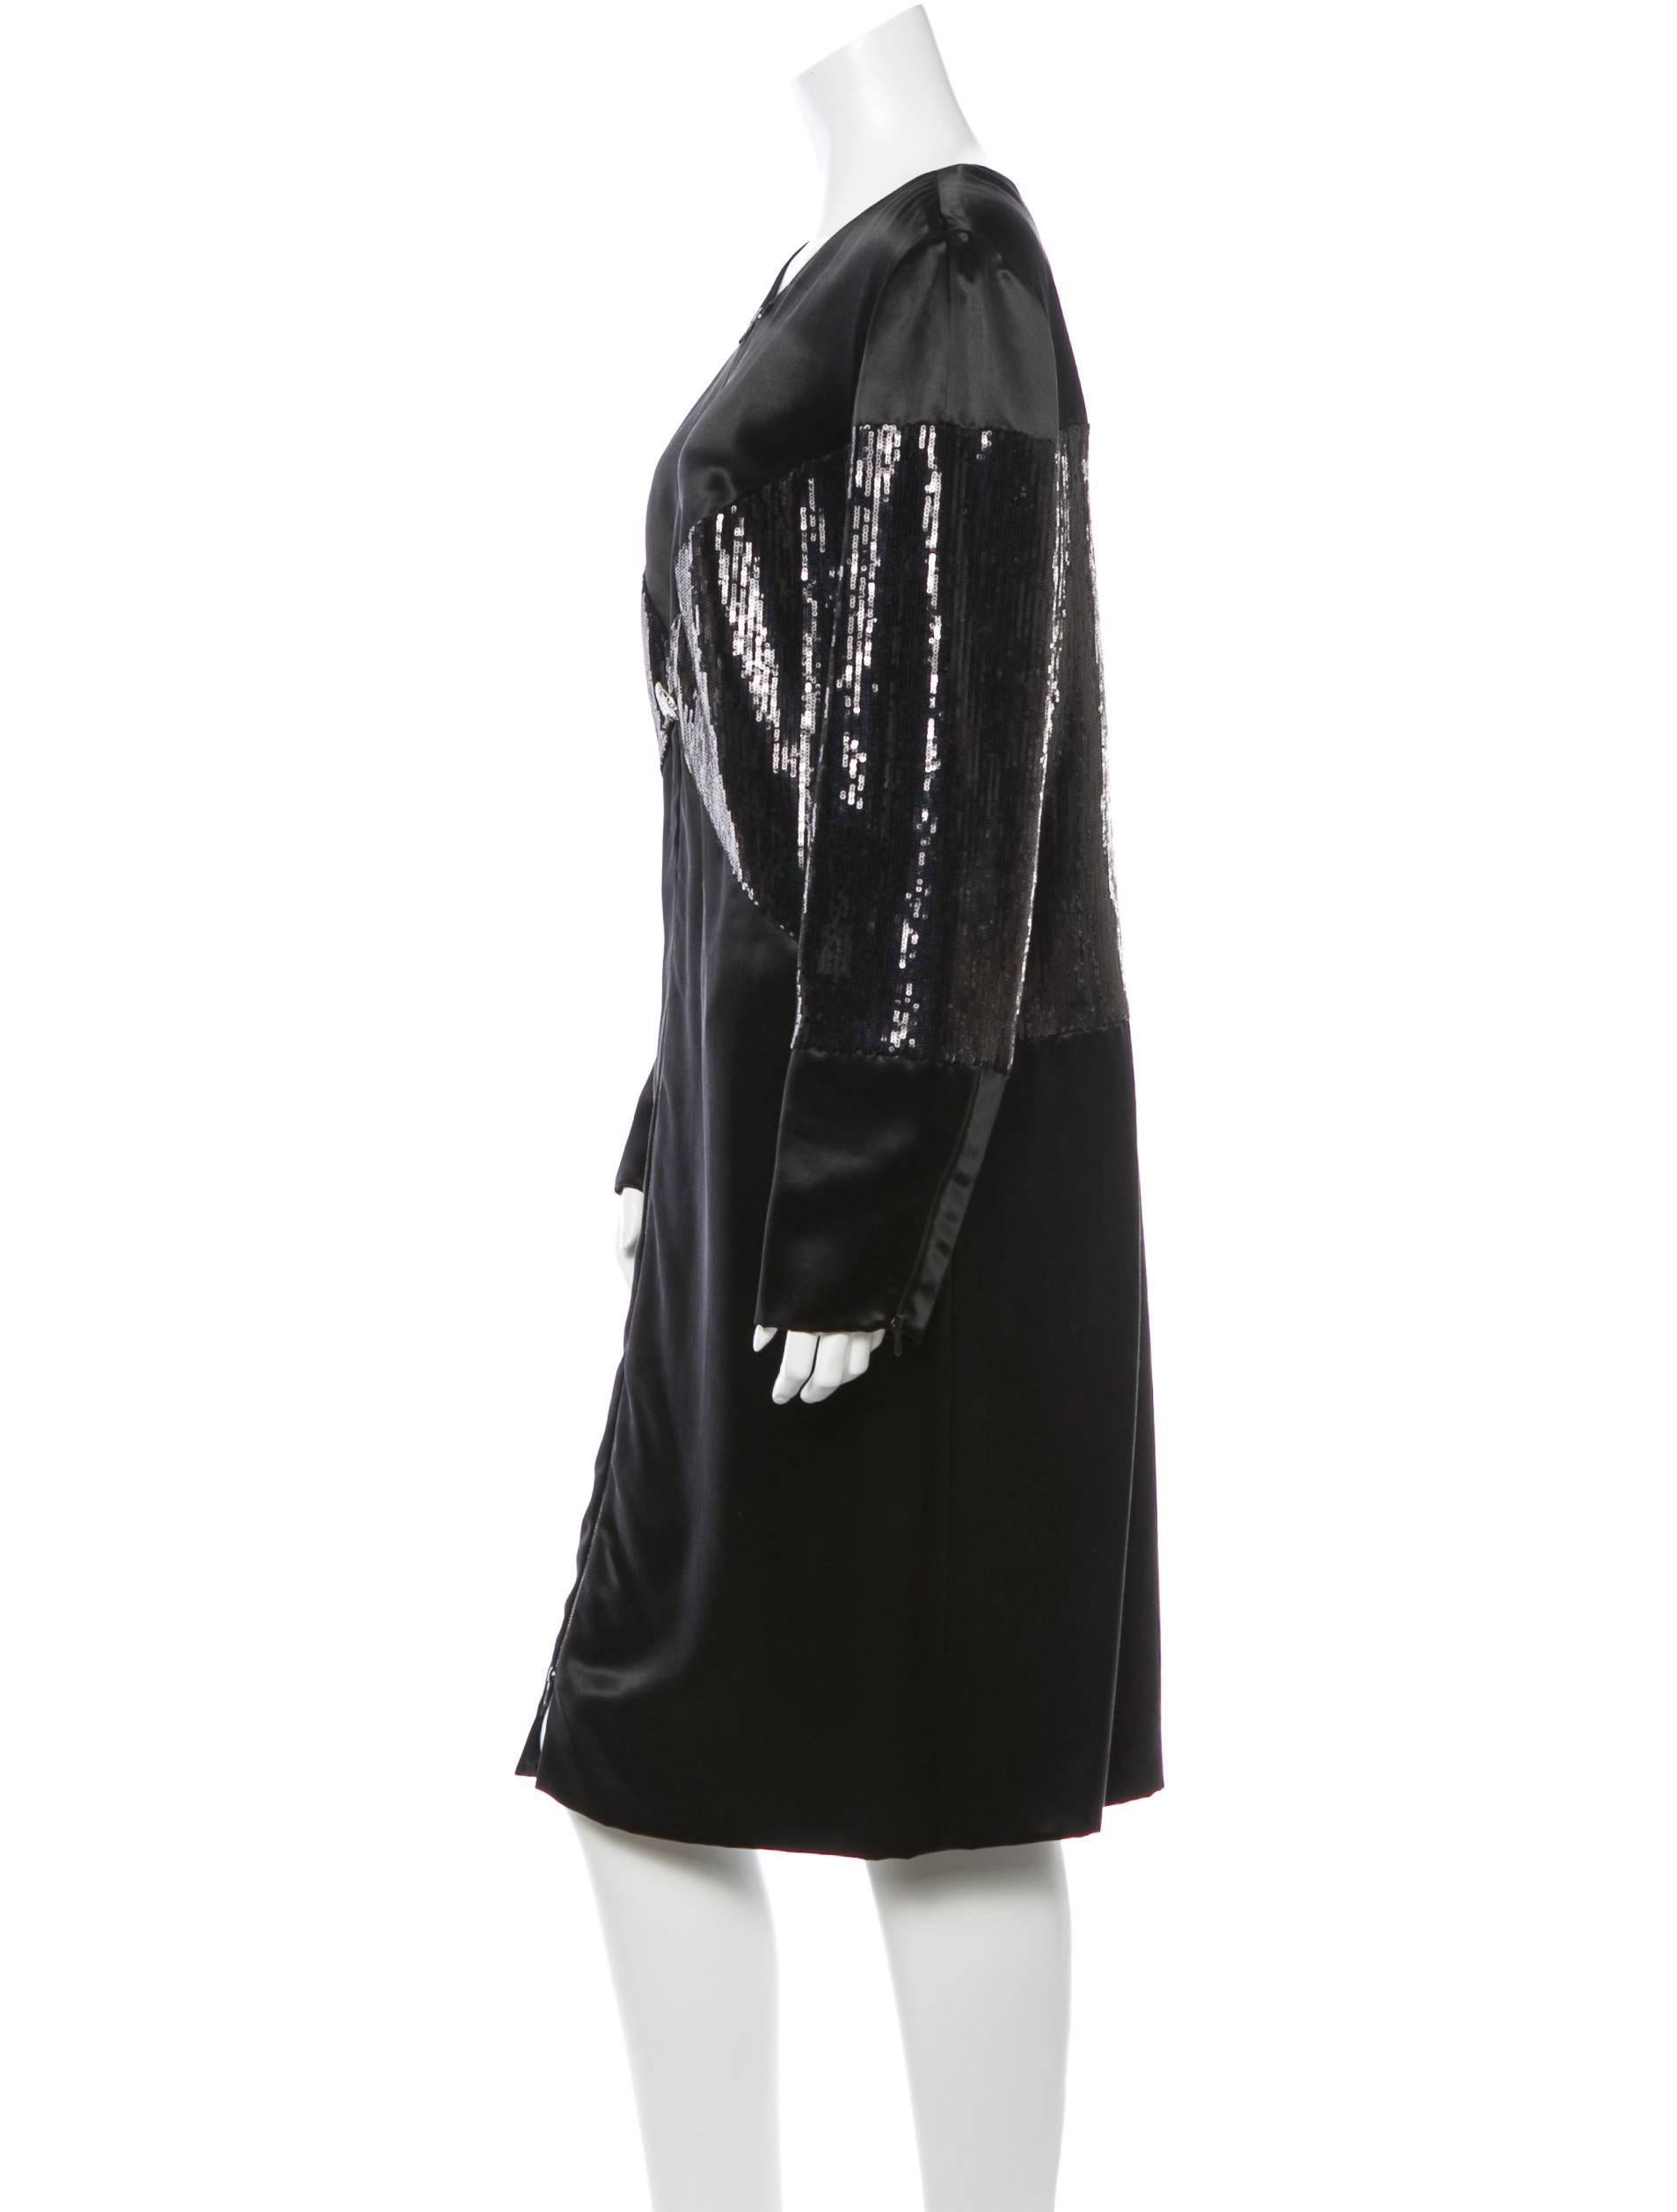 CURATOR'S NOTES

From the Fall 2010 Collection, this jaw-dropping Chanel satin midi dress boasts sequin accents, embellished CC buttons at waist, long sleeves and two-way front zip closure. 

If this is your size, do not miss your chance to own